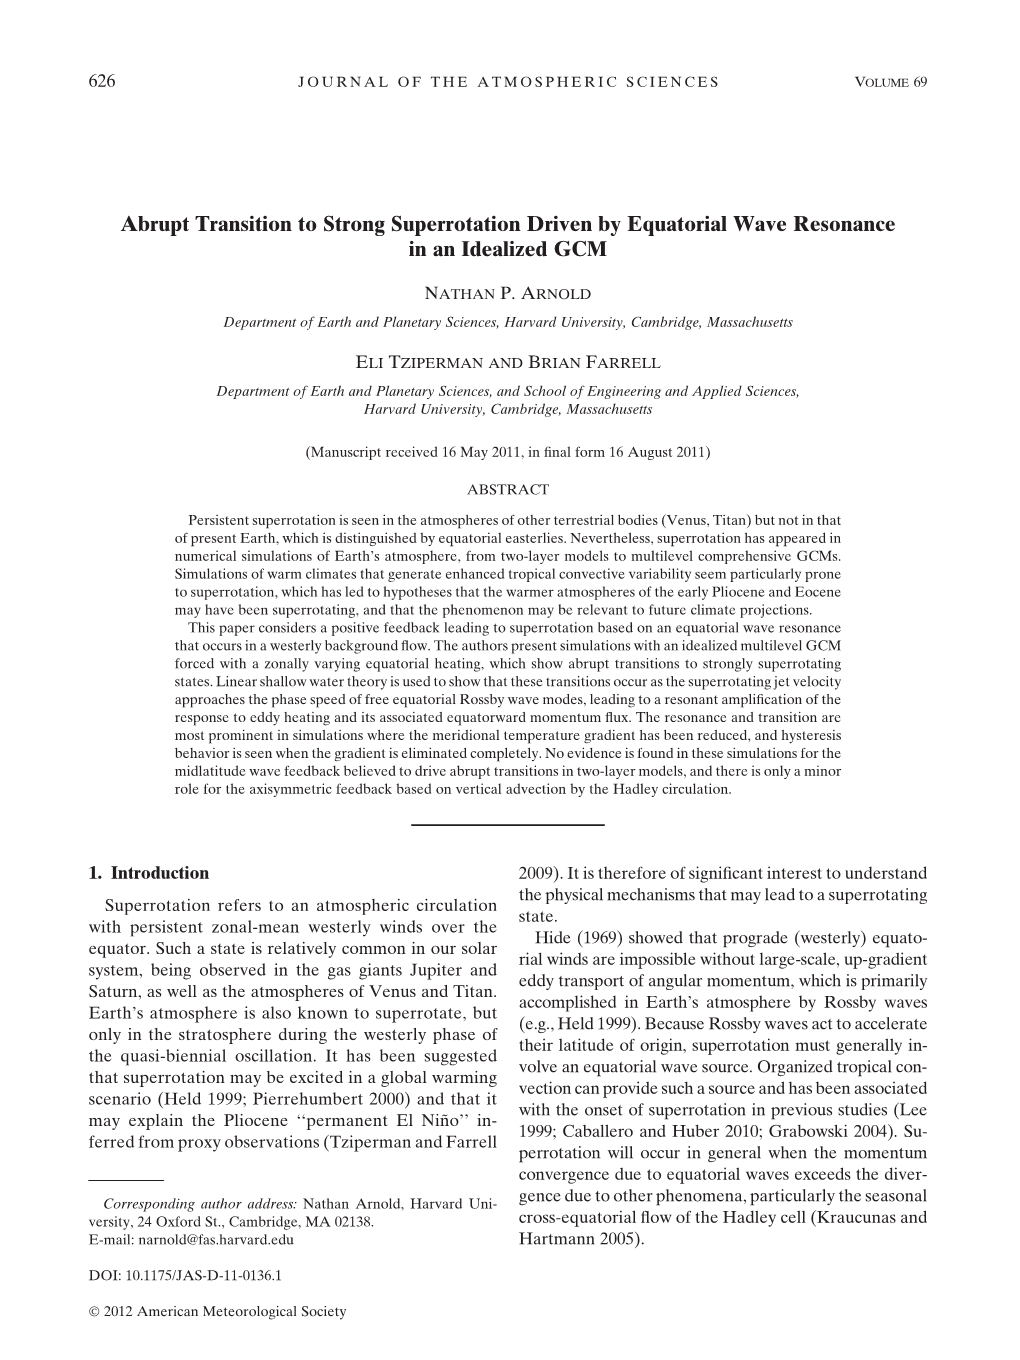 Abrupt Transition to Strong Superrotation Driven by Equatorial Wave Resonance in an Idealized GCM